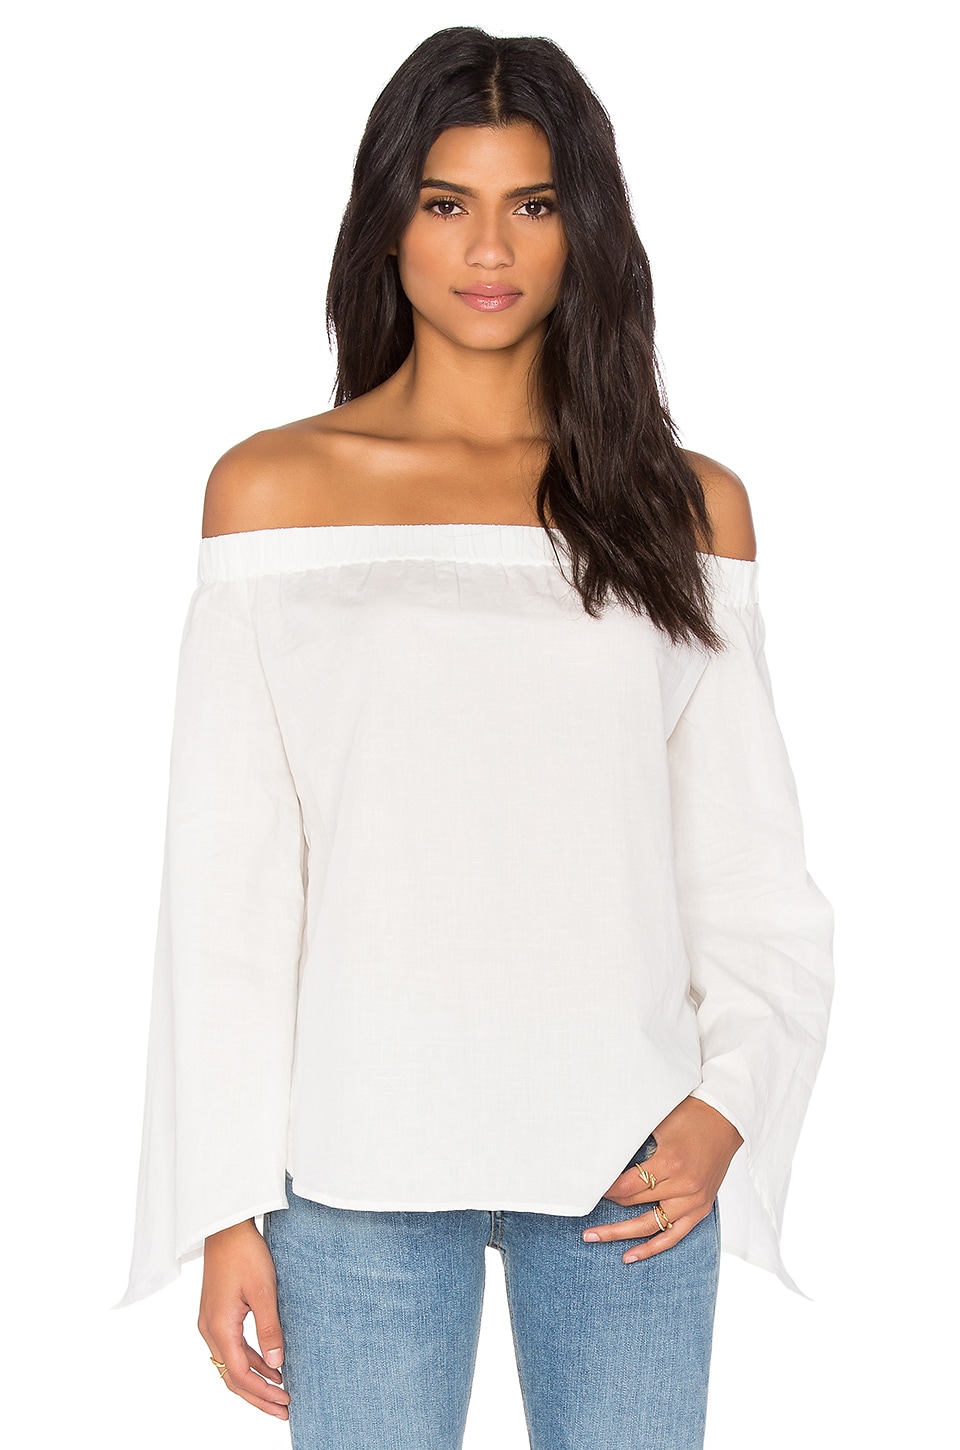 Finders Keepers Bright Lights Top in White | REVOLVE